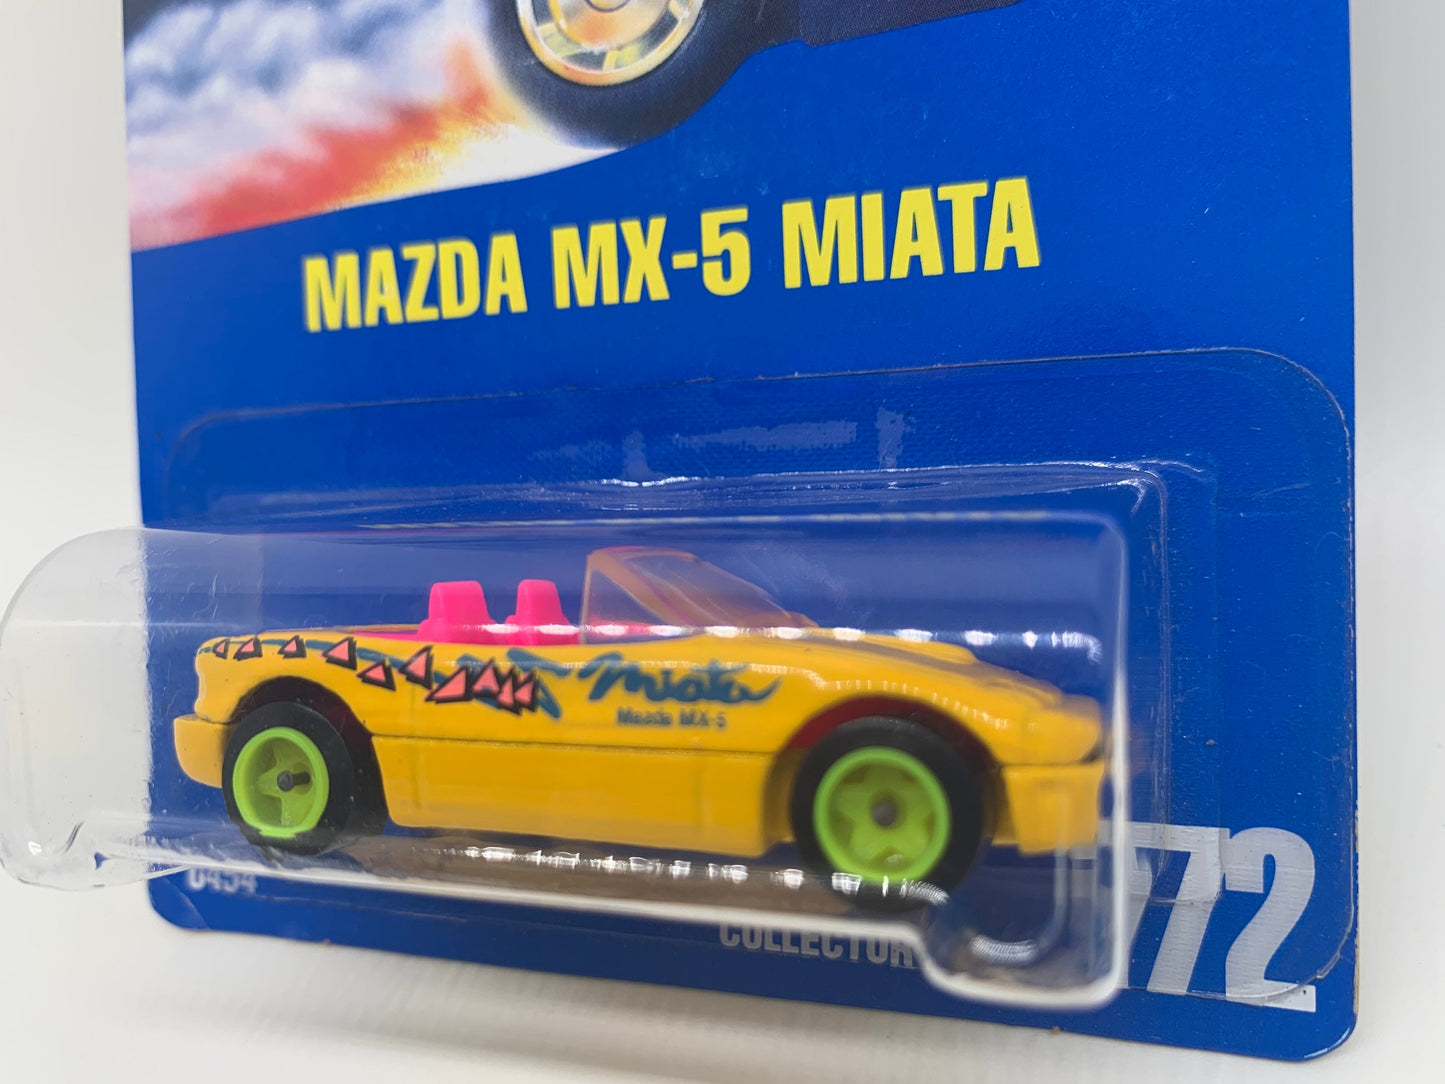 Hot Wheels Mazda MX-5 Miata Yellow Collectable Miniature Scale Model Toy Car Perfect Birthday Gift